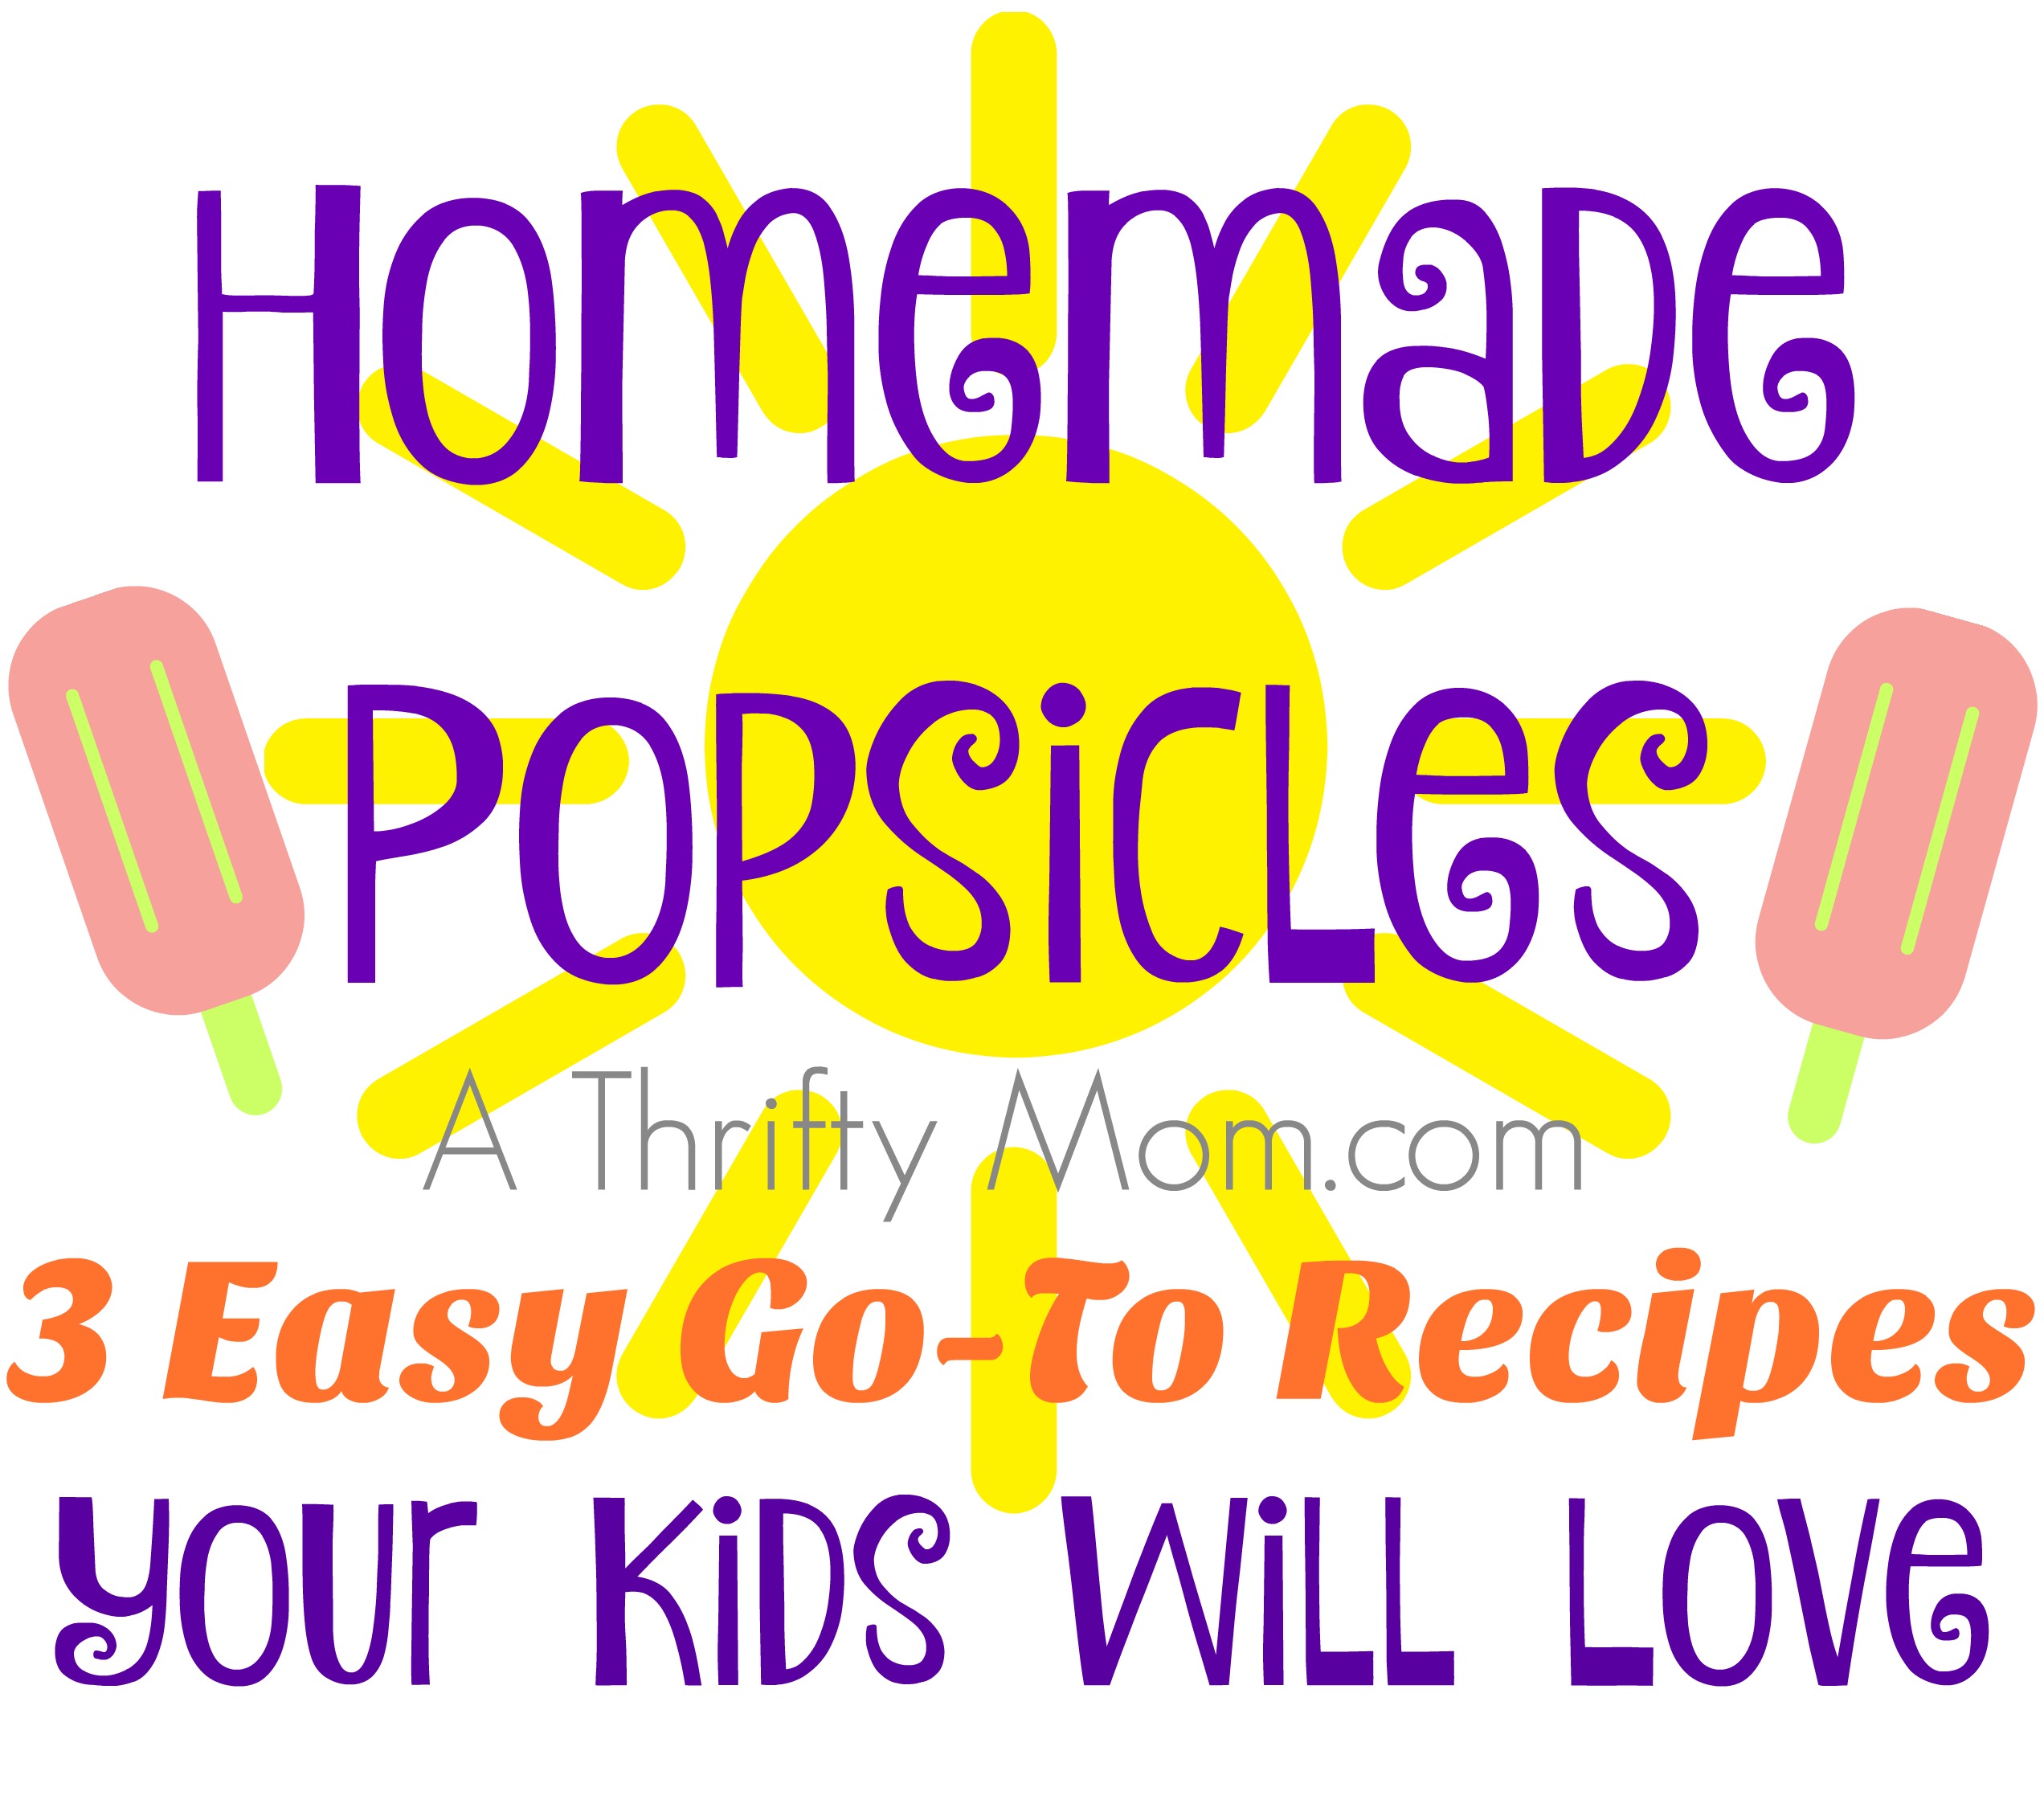 3 Popsicle Recipes You Kids Will Love